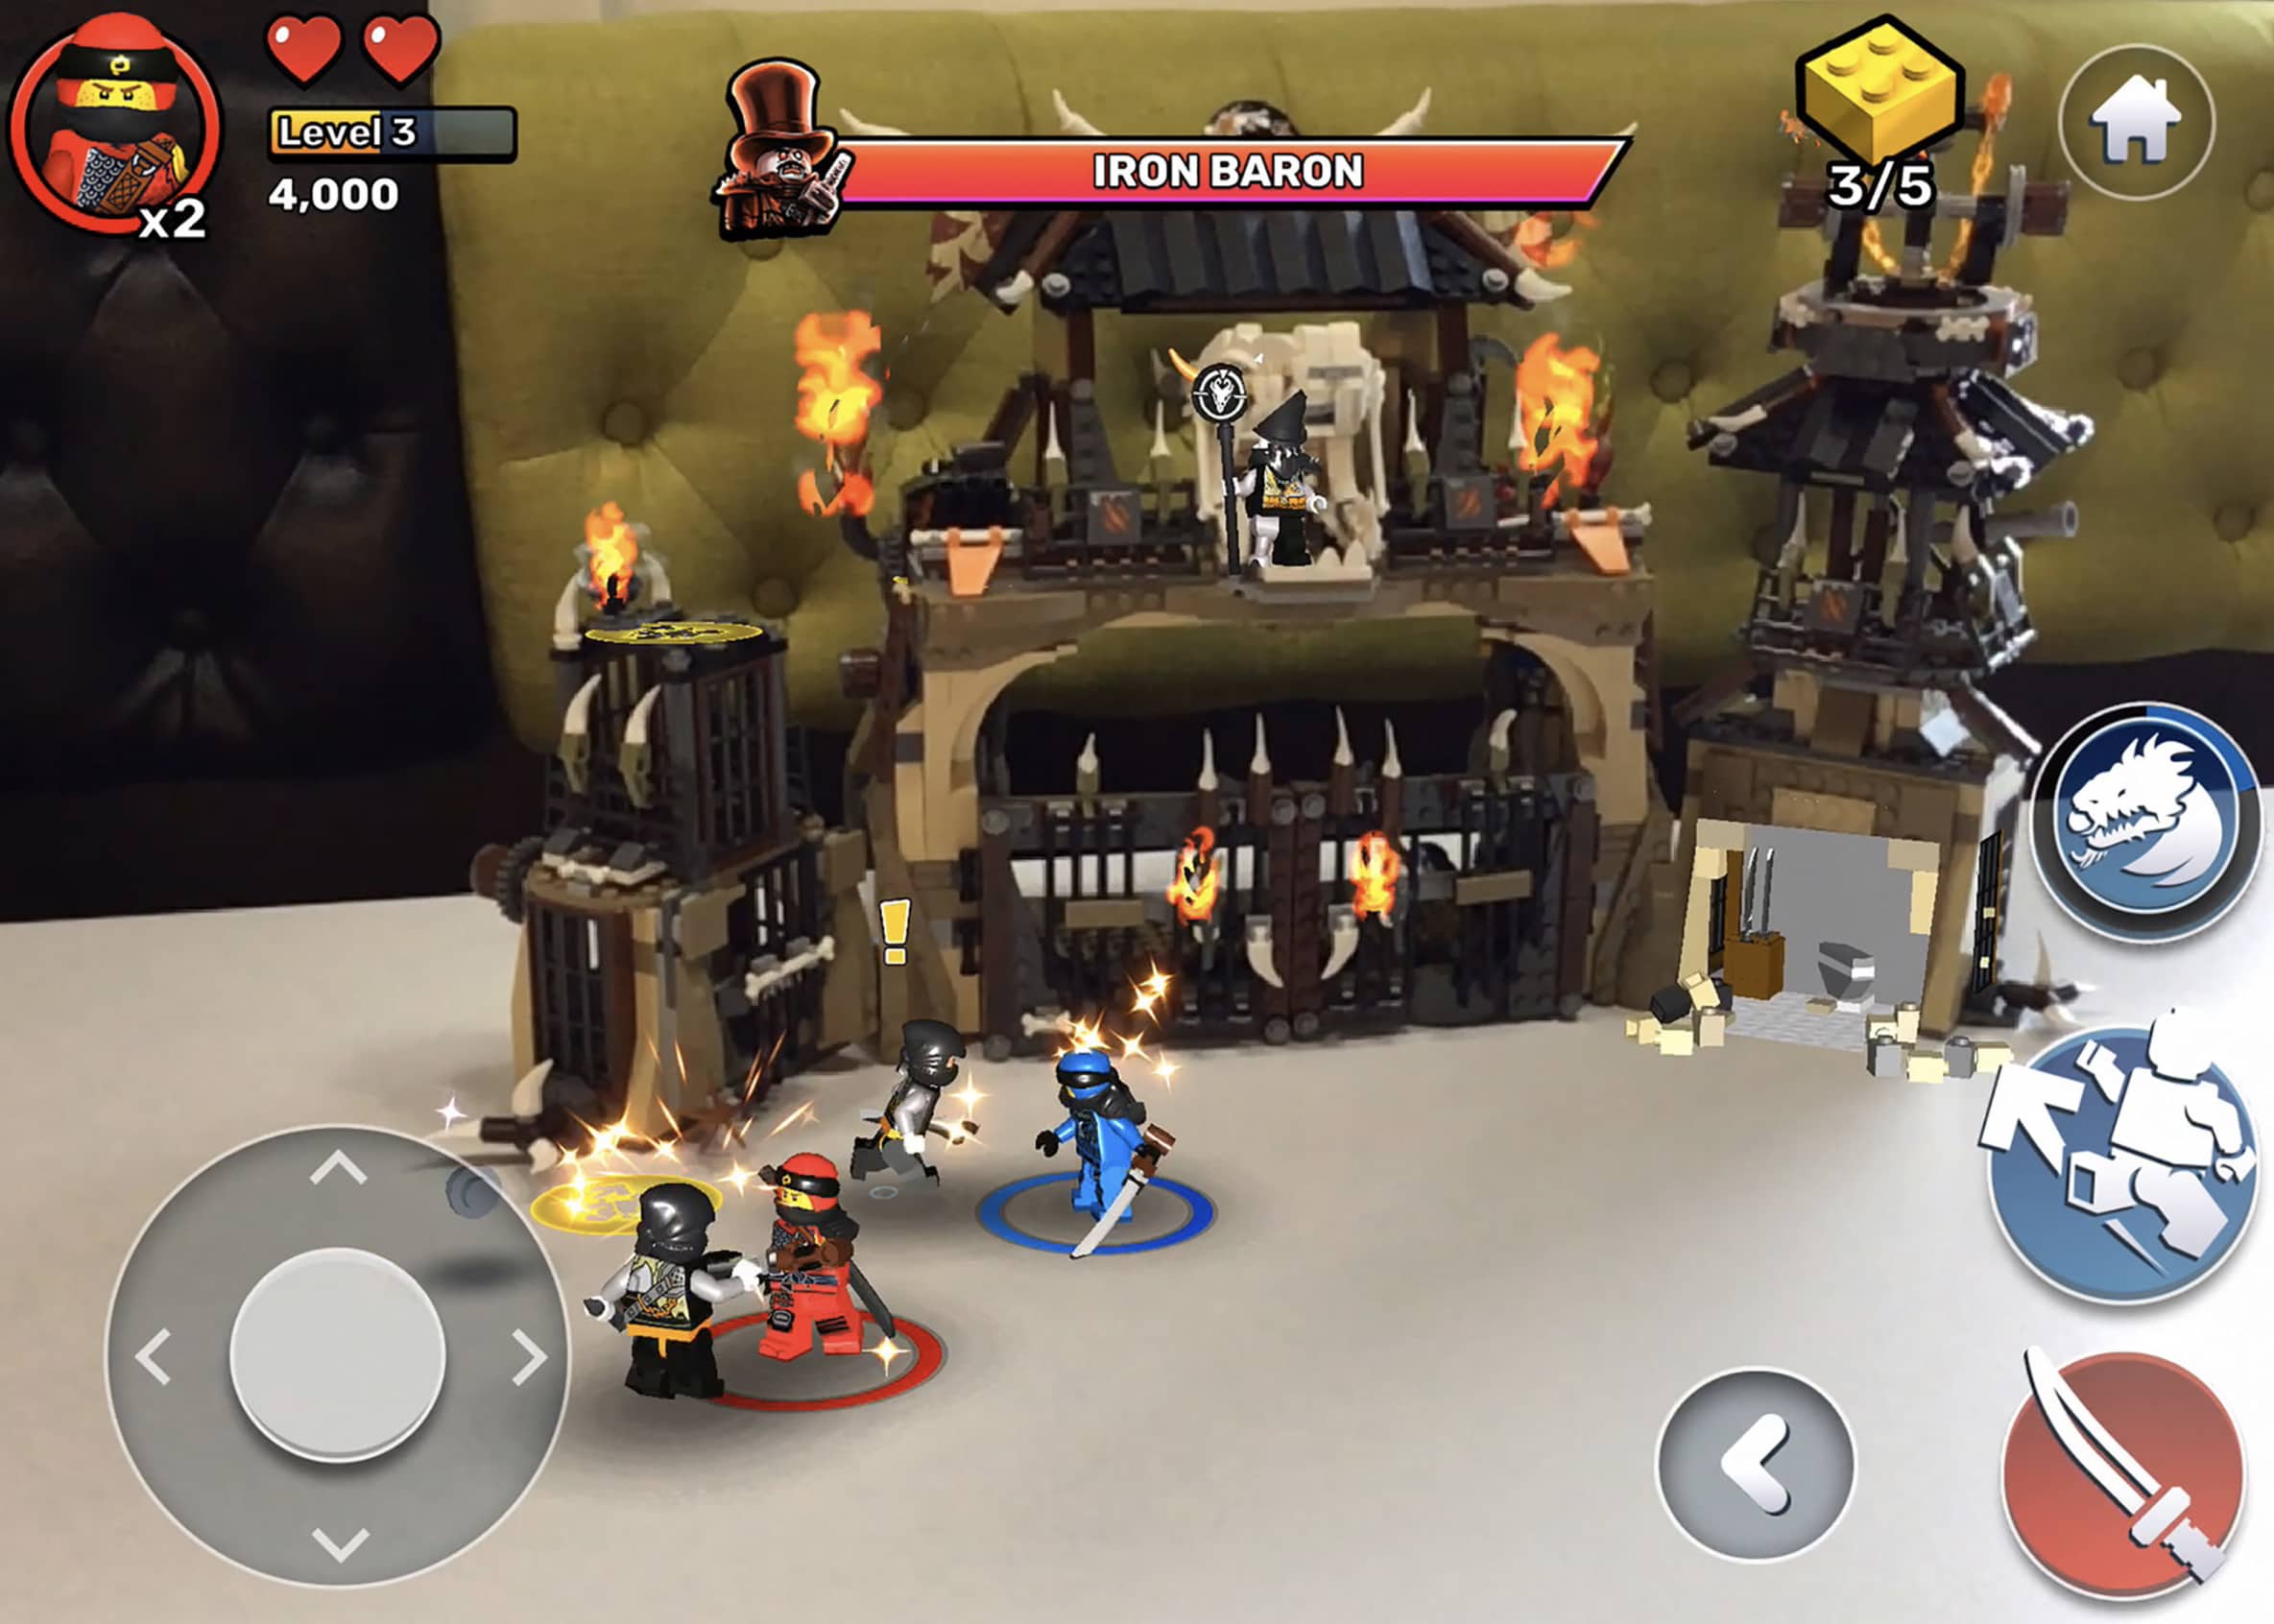 Lego Ninjago AR brings playsets to life in a mixed reality in game.